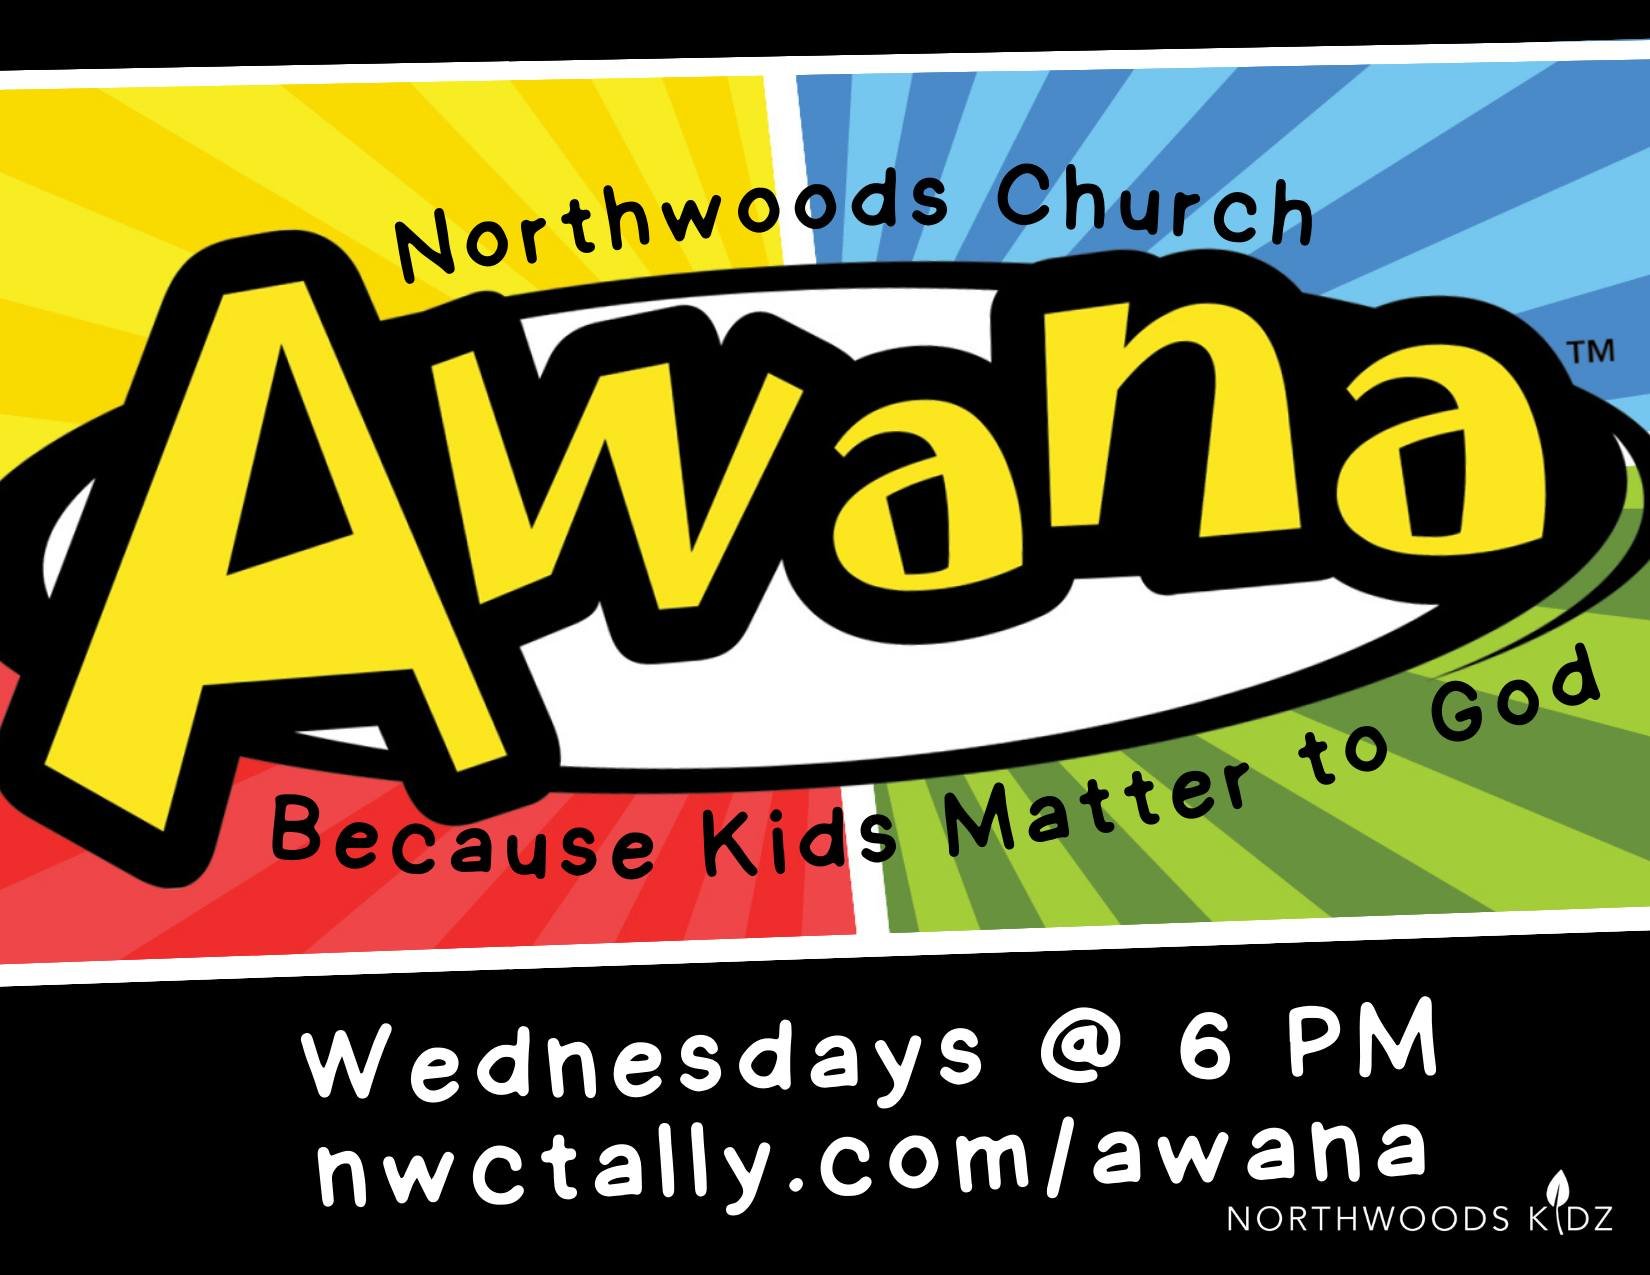 Wednesday is Family Night at Northwoods Church! 

*Today's theme is Mismatch Day at AWANA, so show your club spirit and earn extra points by wearing mismatched clothes, shoes or socks to club tonight! (Remember your vest and handbook as well!)

5 PM 